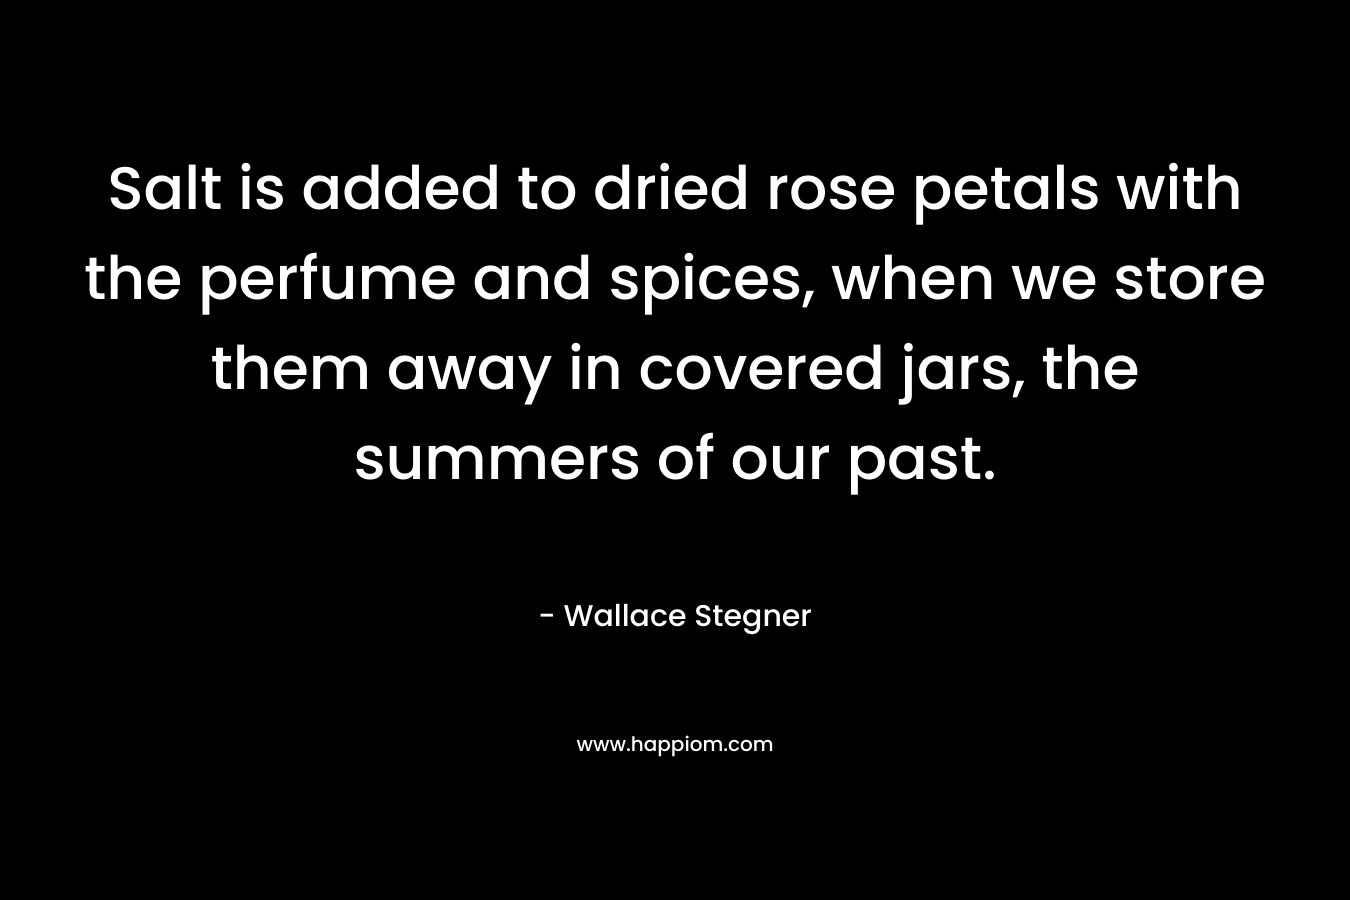 Salt is added to dried rose petals with the perfume and spices, when we store them away in covered jars, the summers of our past.